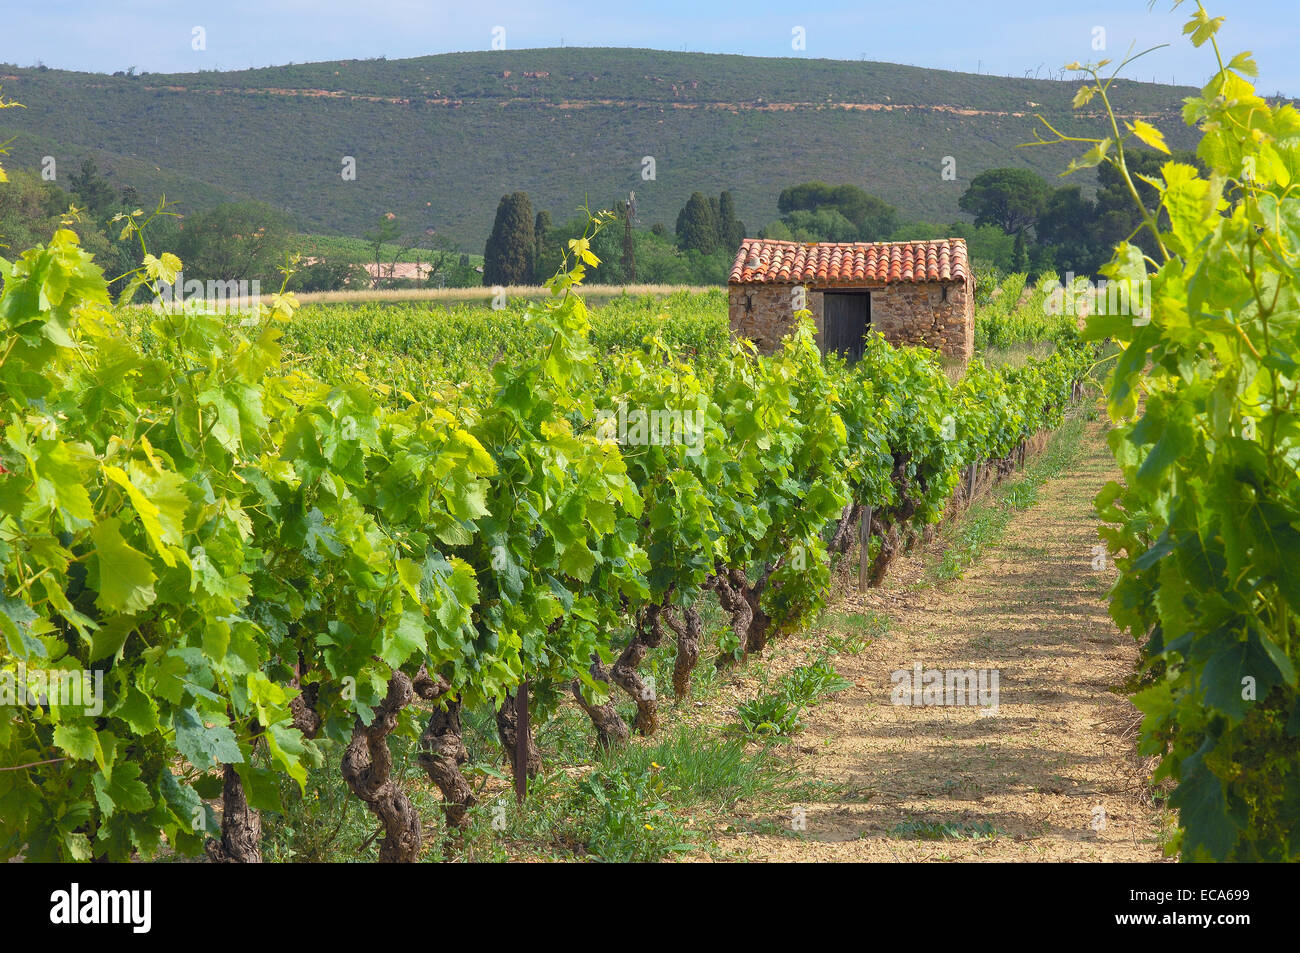 Vineyard near Narbonne, Aude, Languedoc Roussillon, France, Europe Stock Photo